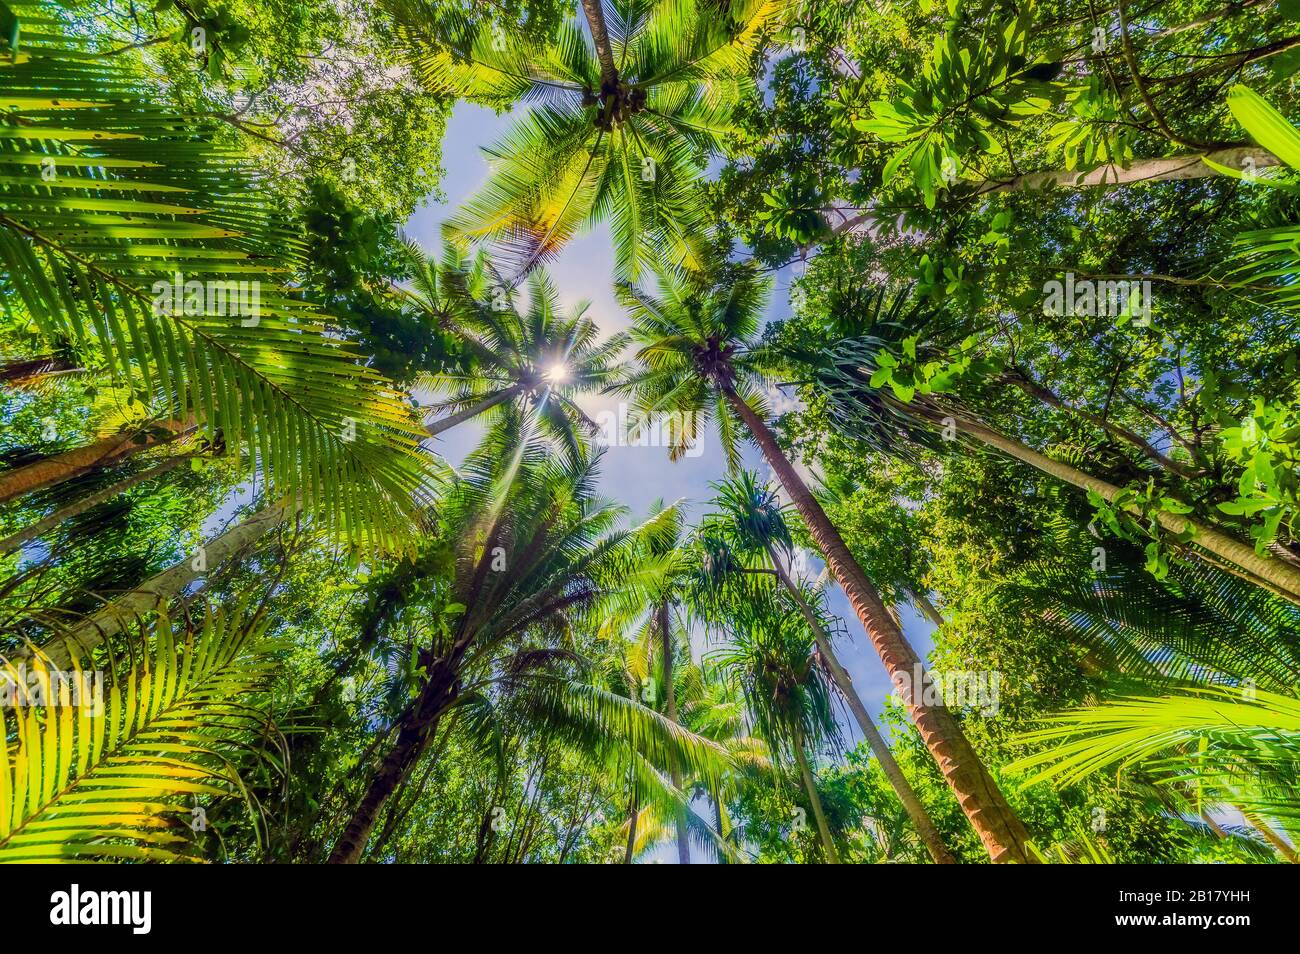 Papua New Guinea, Milne Bay Province, Directly below view of green tall palm trees in summer Stock Photo